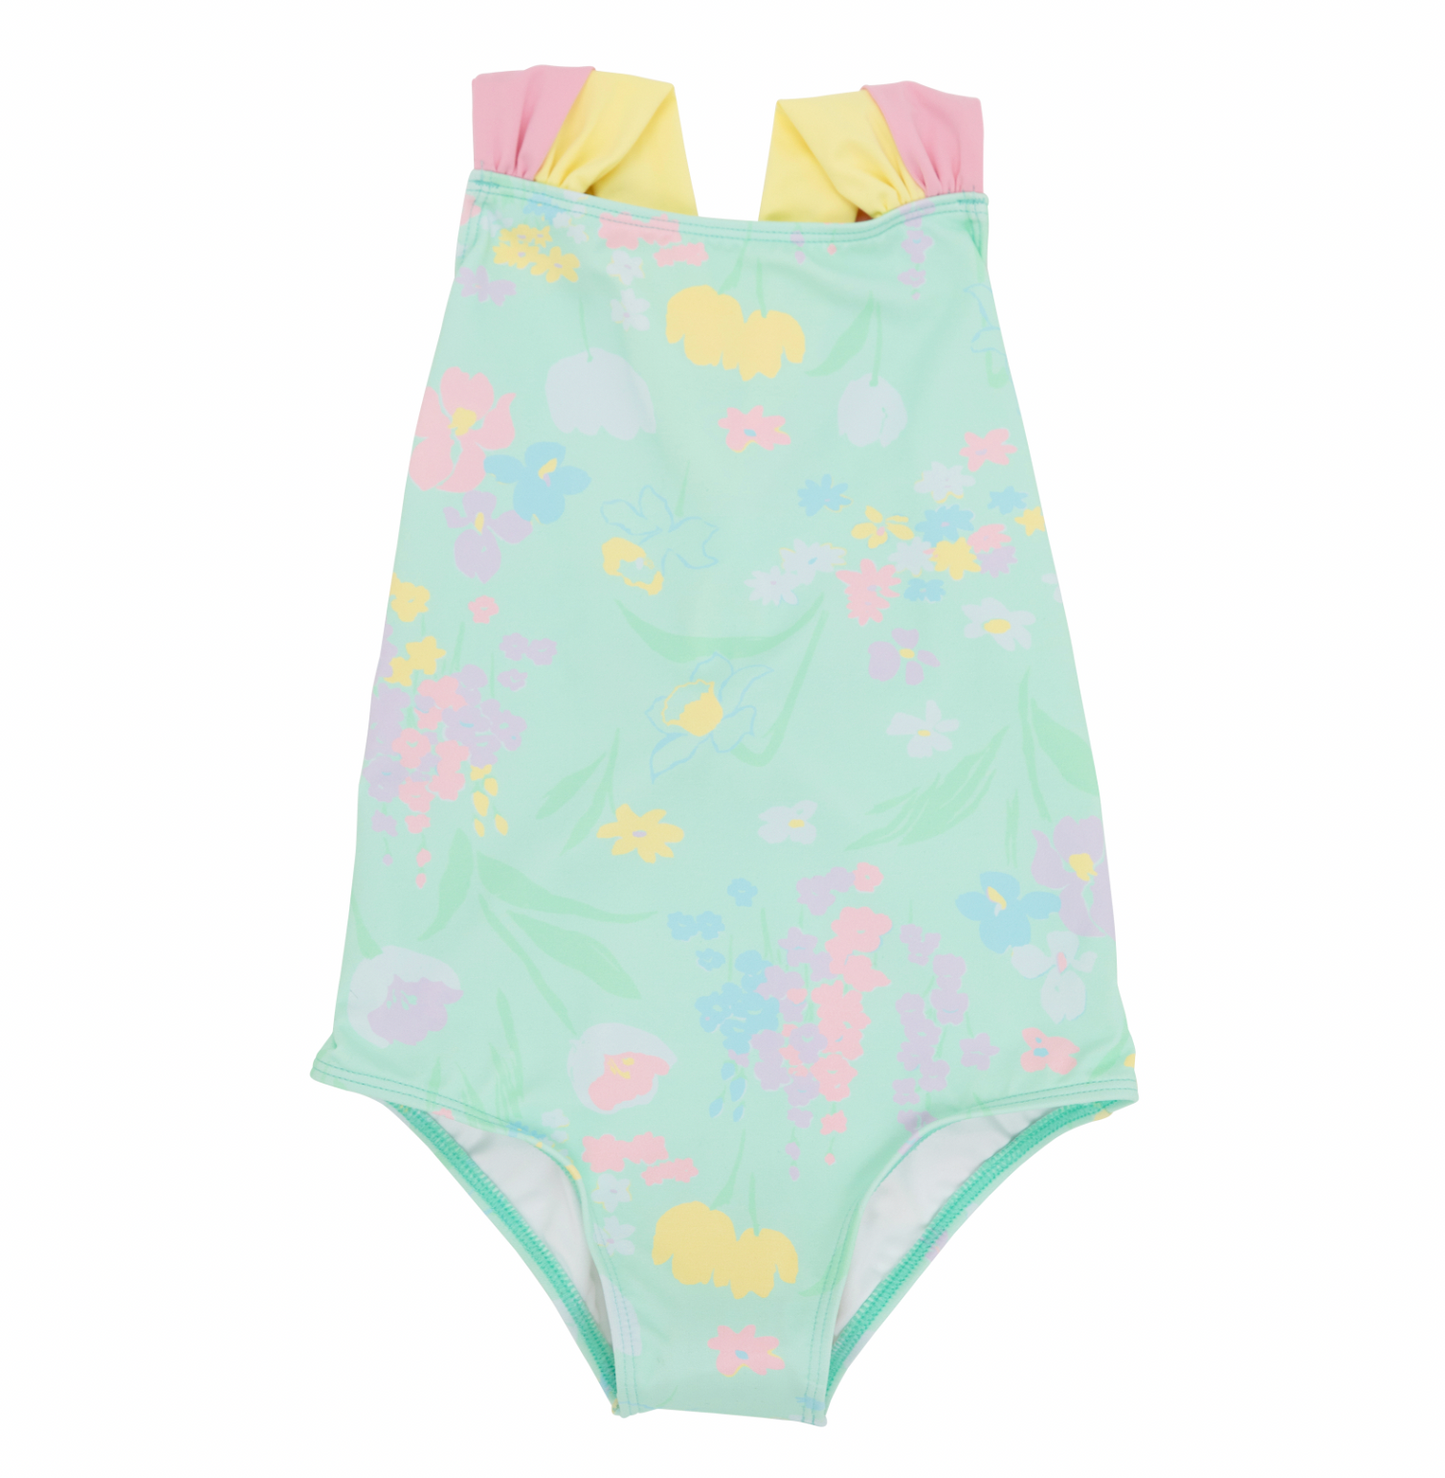 Seabrook Bathing Suit- Glencoe Garden Party/Pier Party Pink